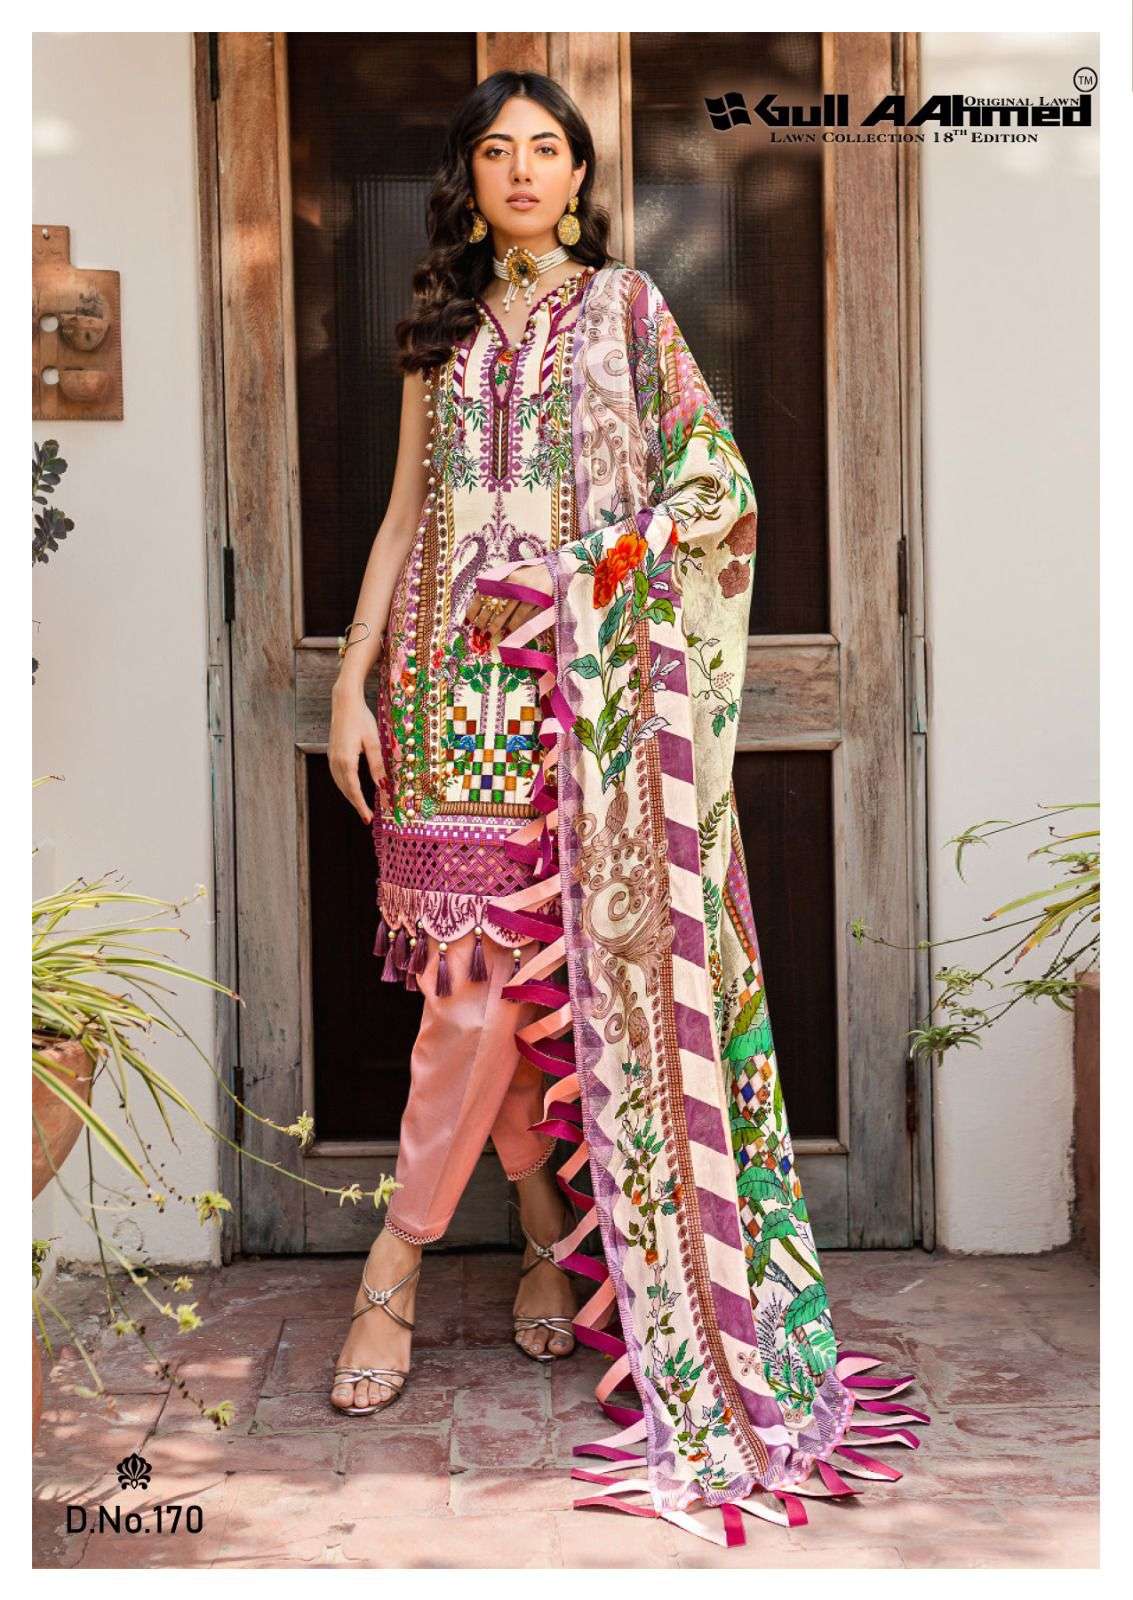 Gull A Ahmed Vol 18 Lawn Cotton Dress Material  Wholesale catalog